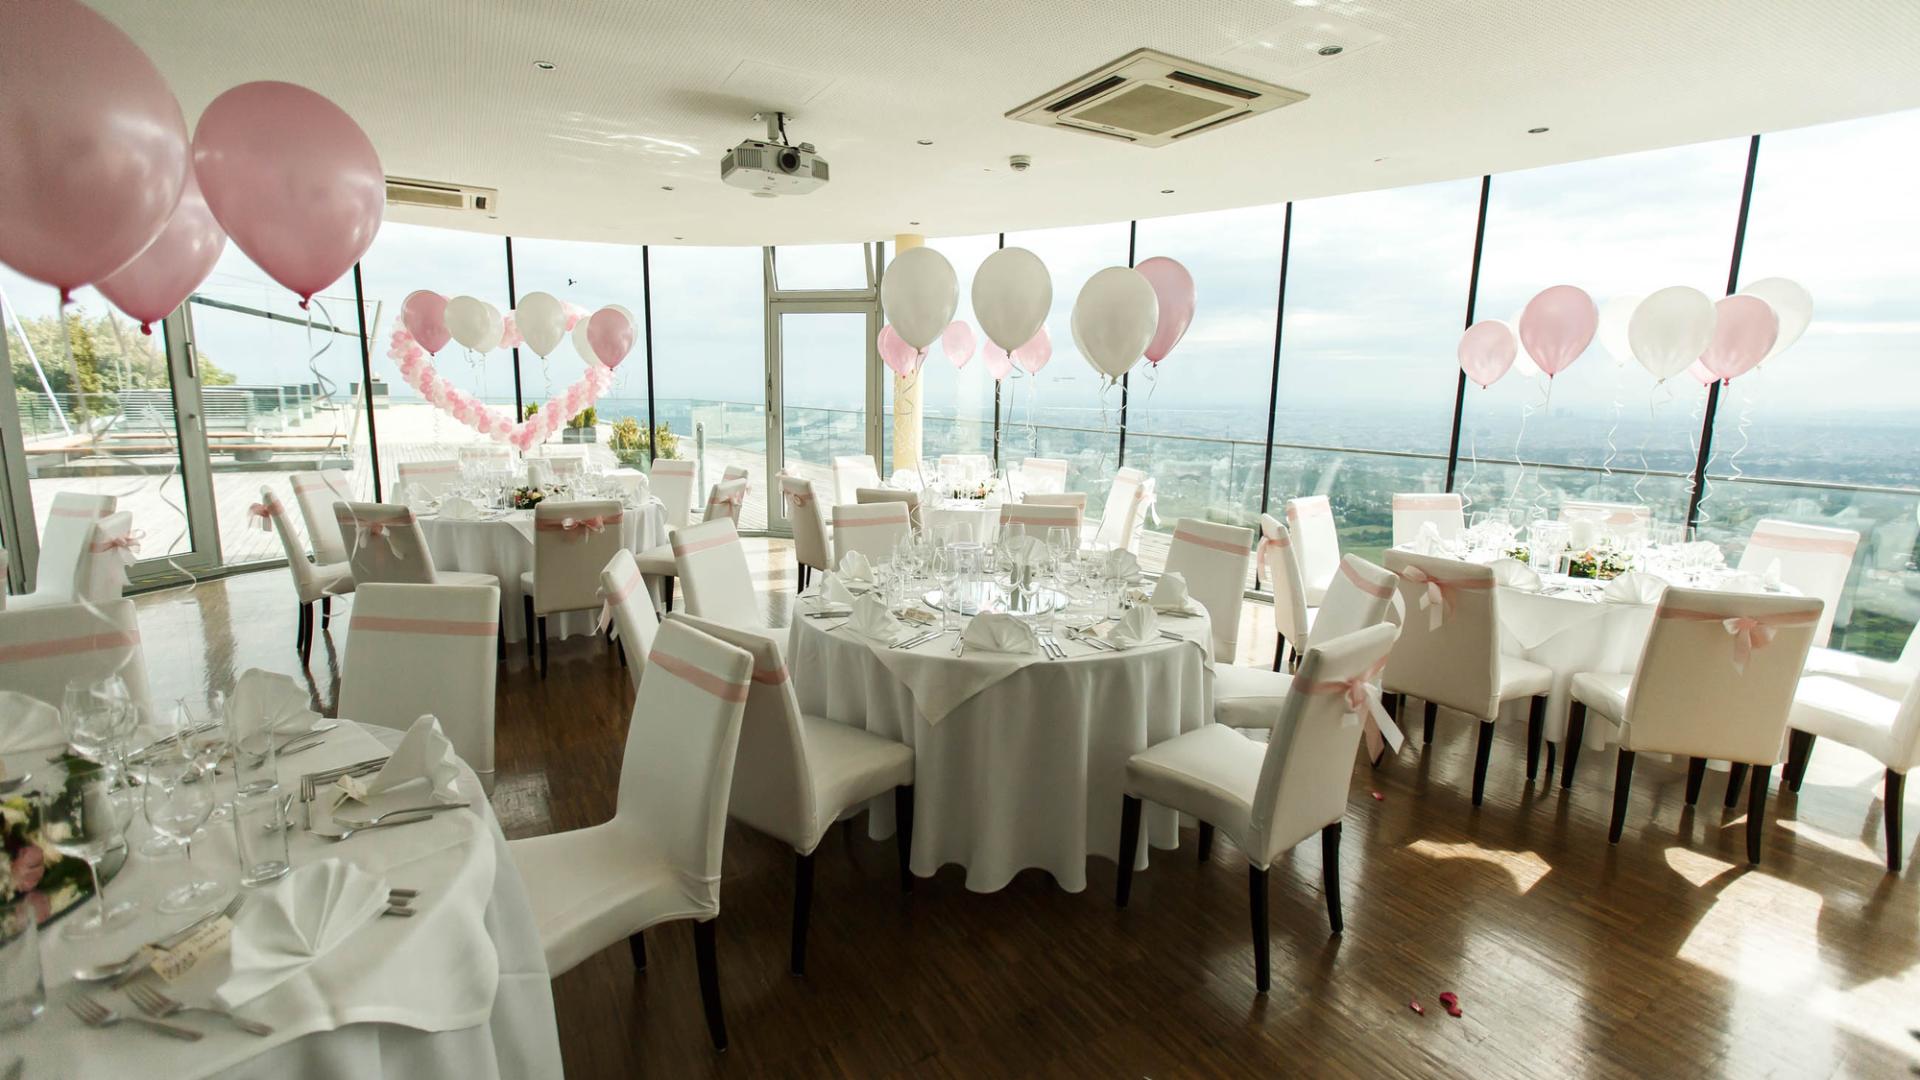 Baby Shower Venues for Hire in Central London